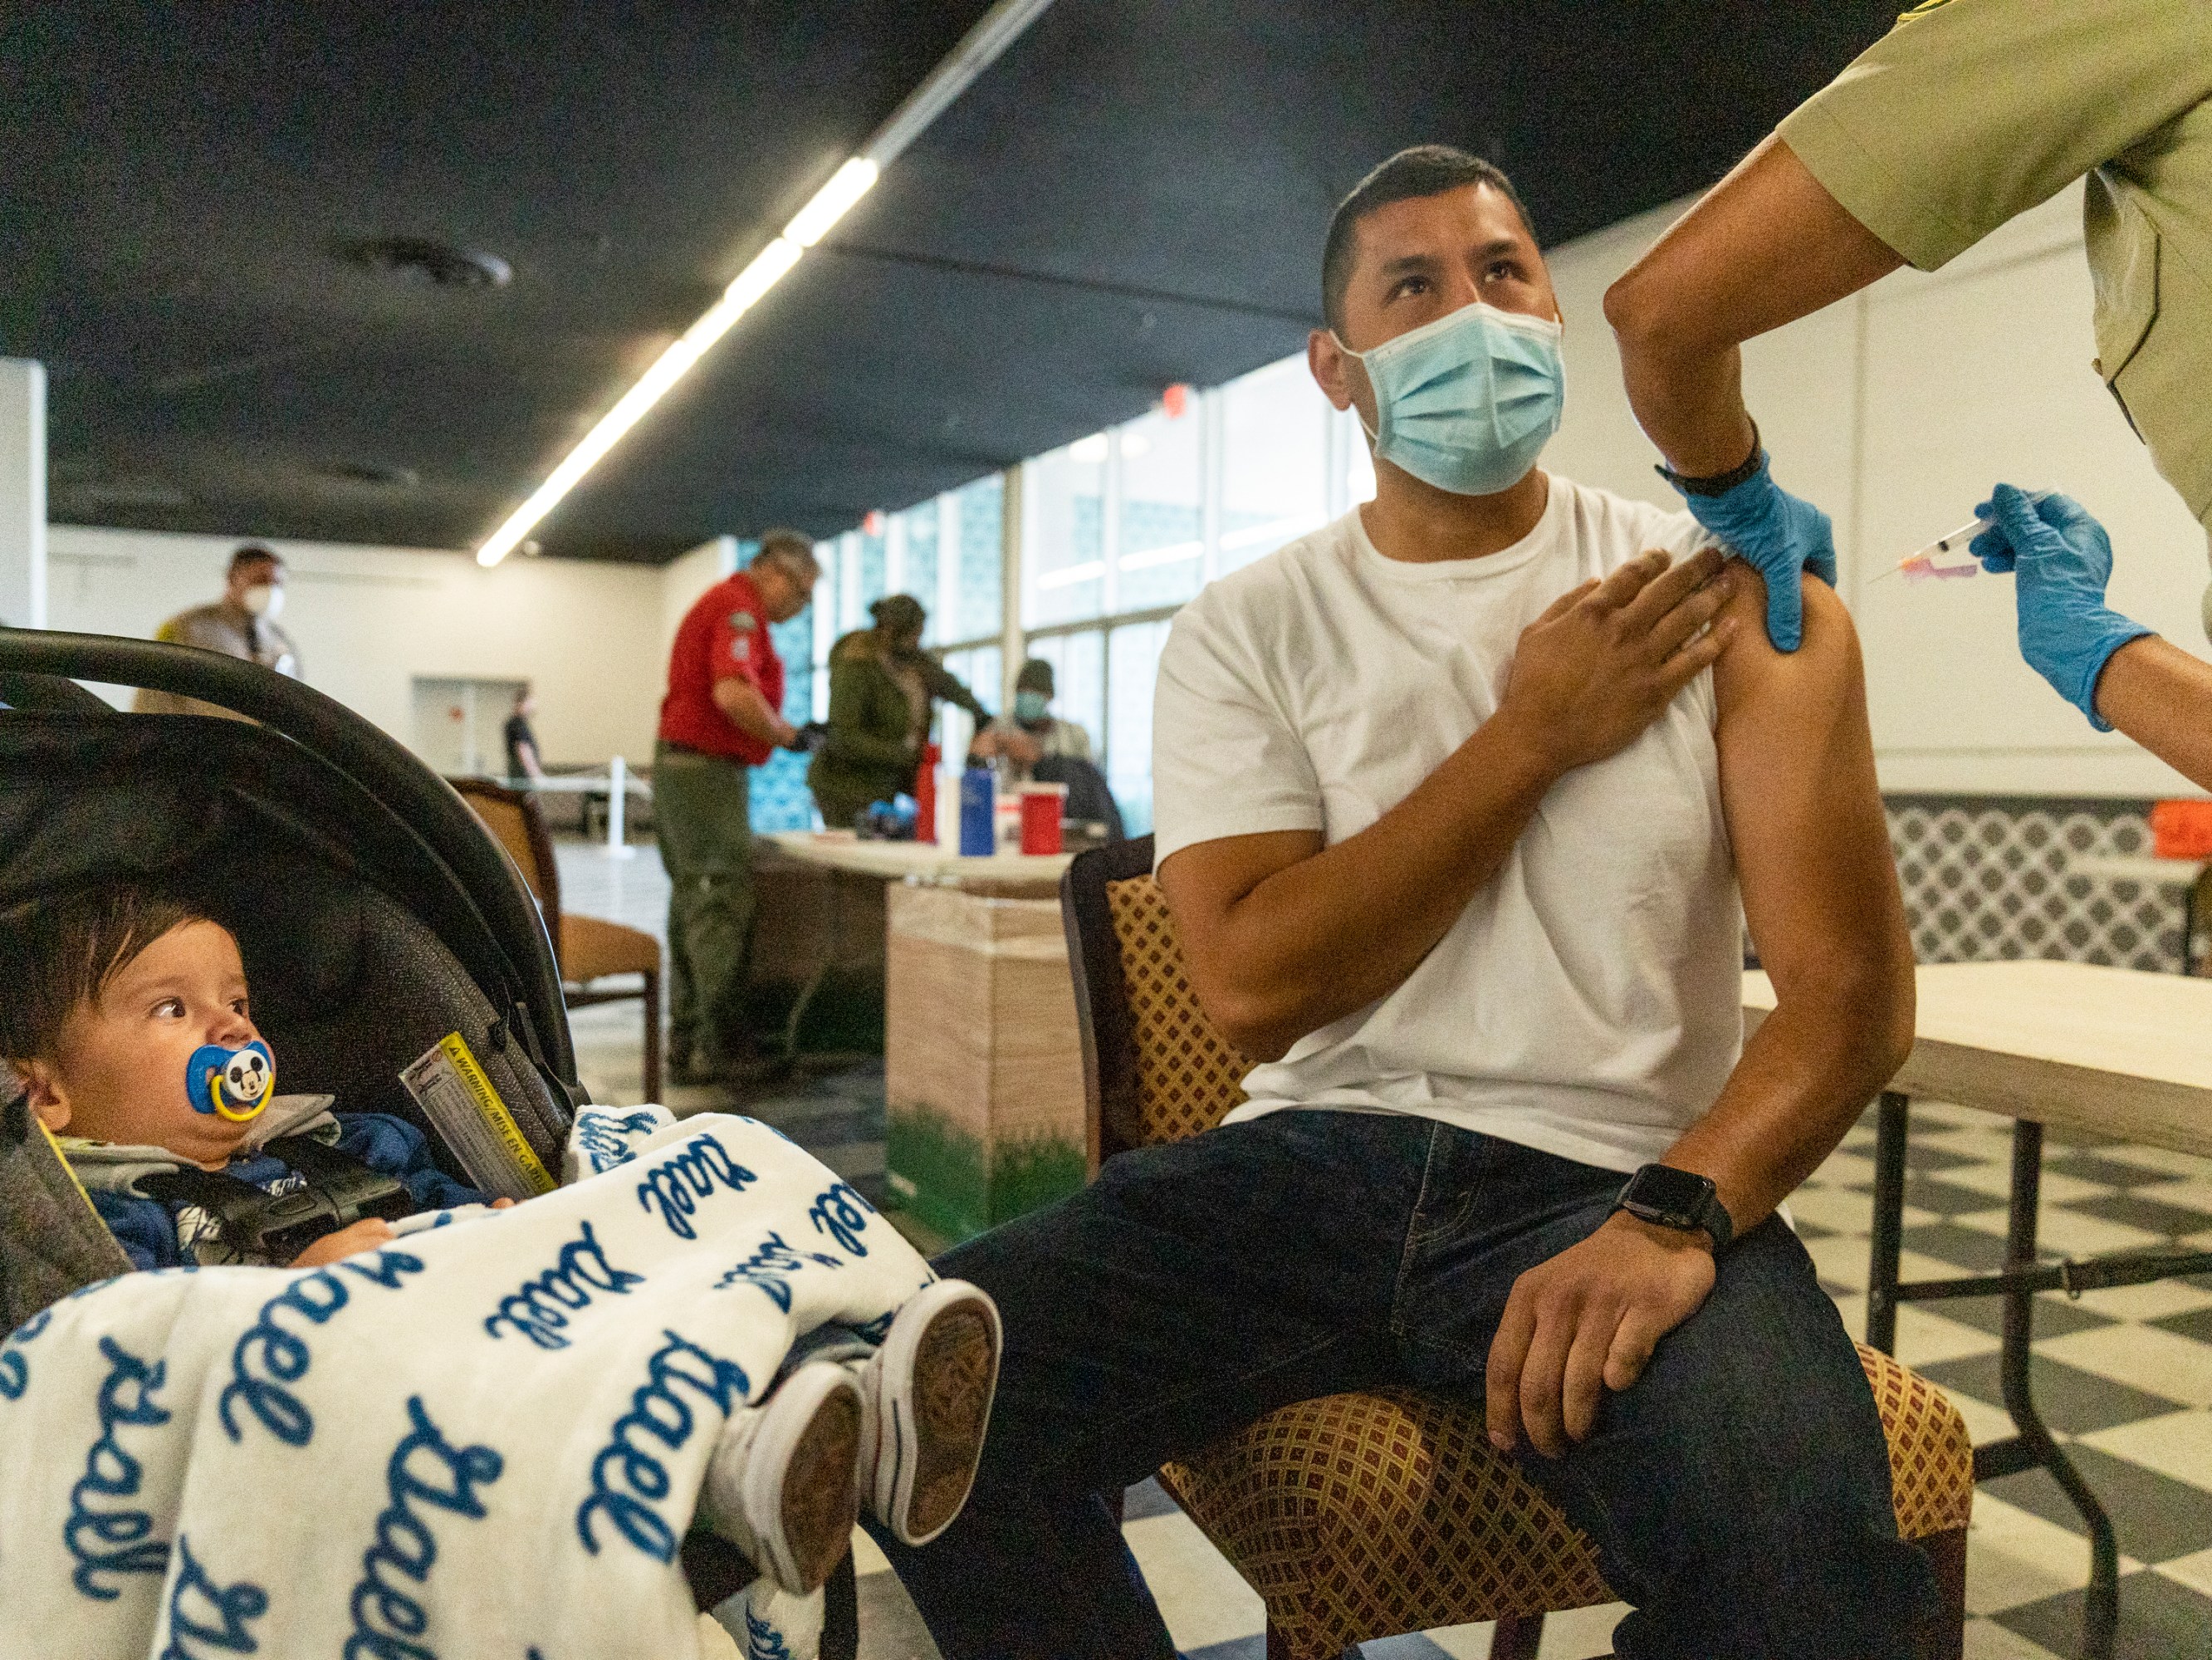 A sheriff's deputy is inoculated with the Moderna vaccine at a mobile clinic in Pomona, California